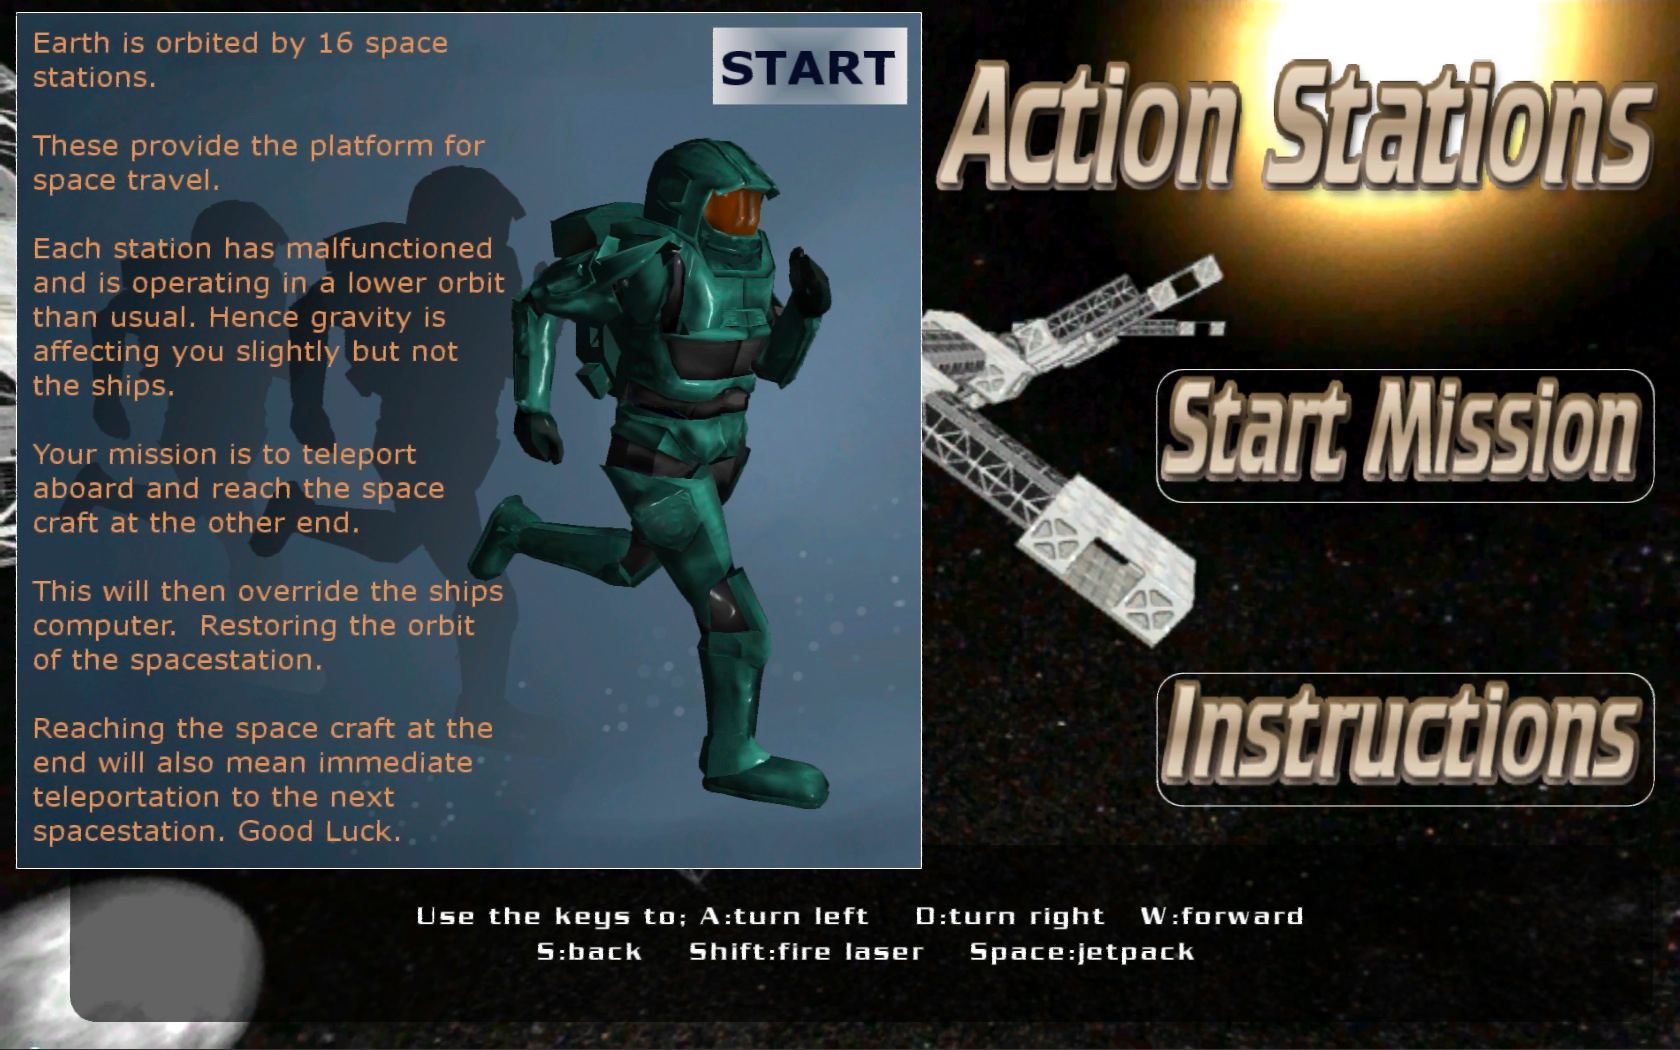 Action Stations 3D Space Mission 2.0 : Instructions